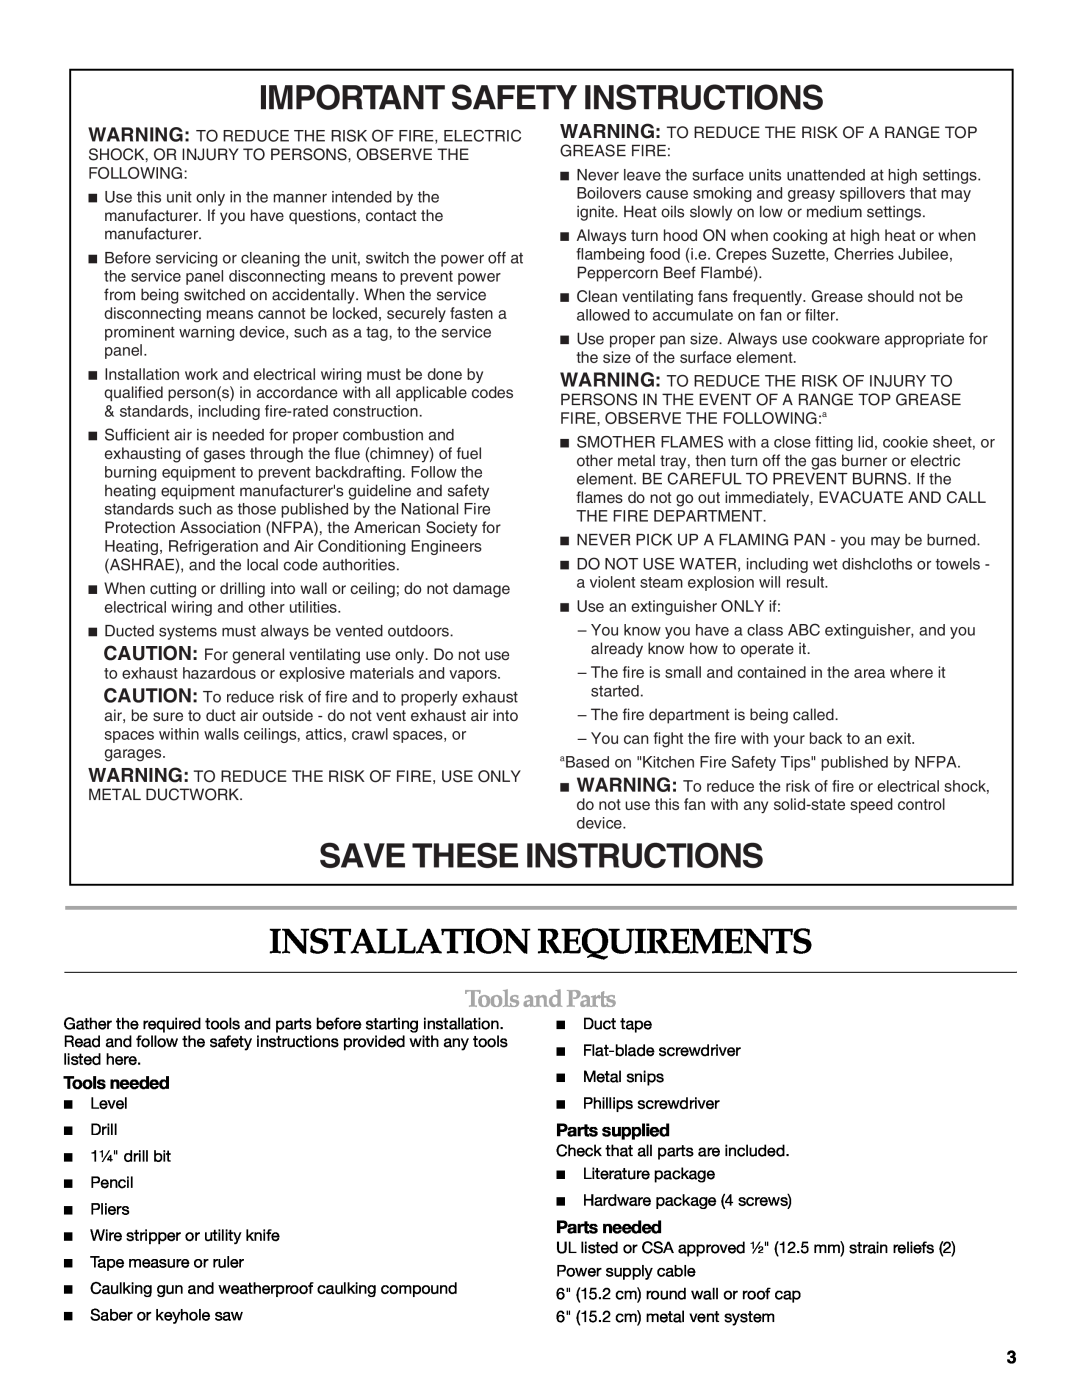 KitchenAid 2005 Installation Requirements, Important Safety Instructions, Save These Instructions, Tools and Parts 